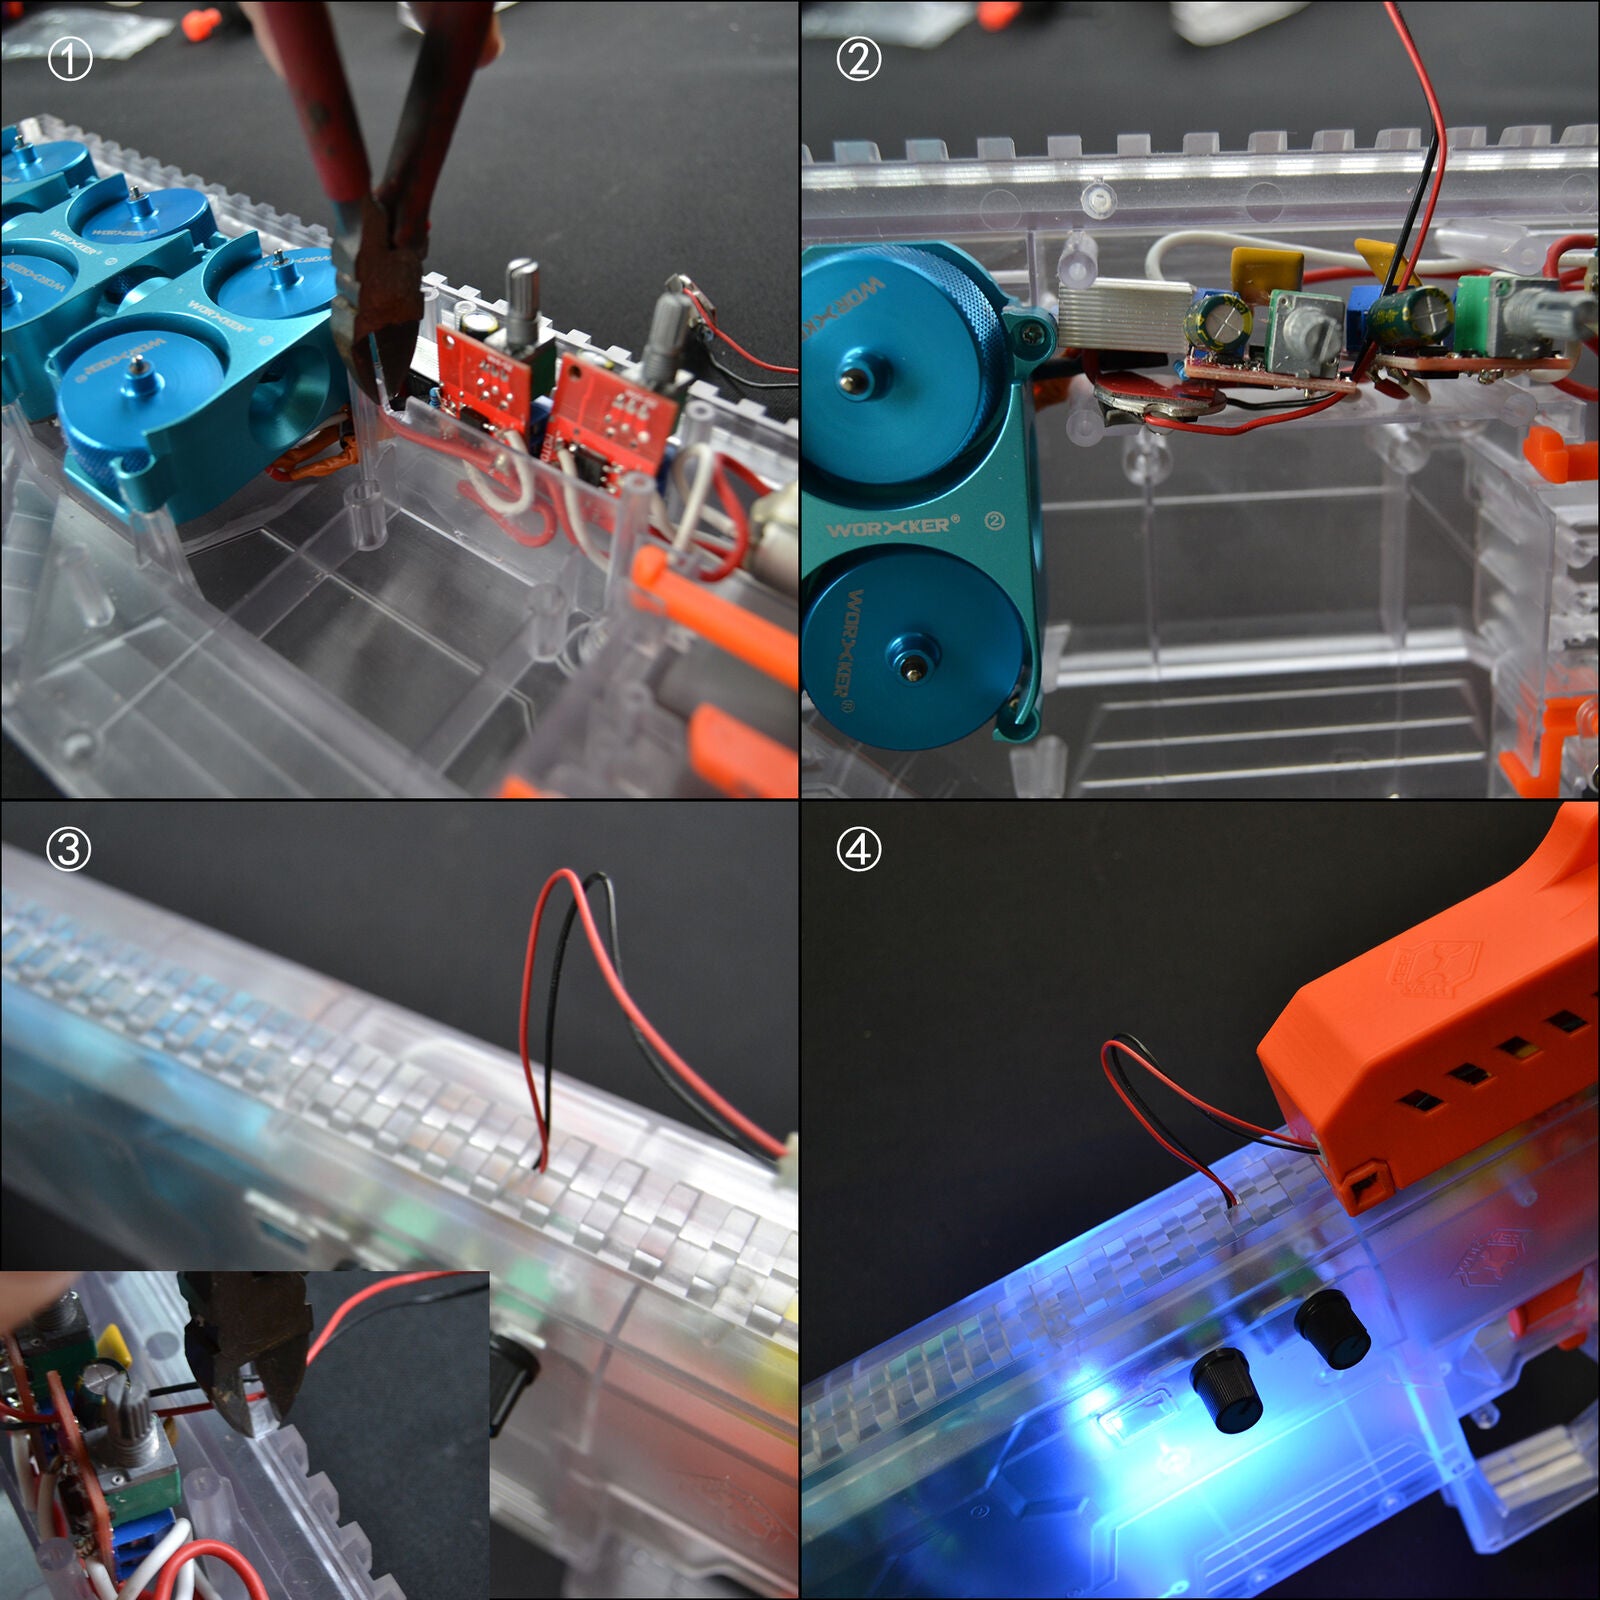 WORKER MOD luminous light Battery Cage Orange for Prophecy-R Blaster Nerf Modify Toy - worker nerf